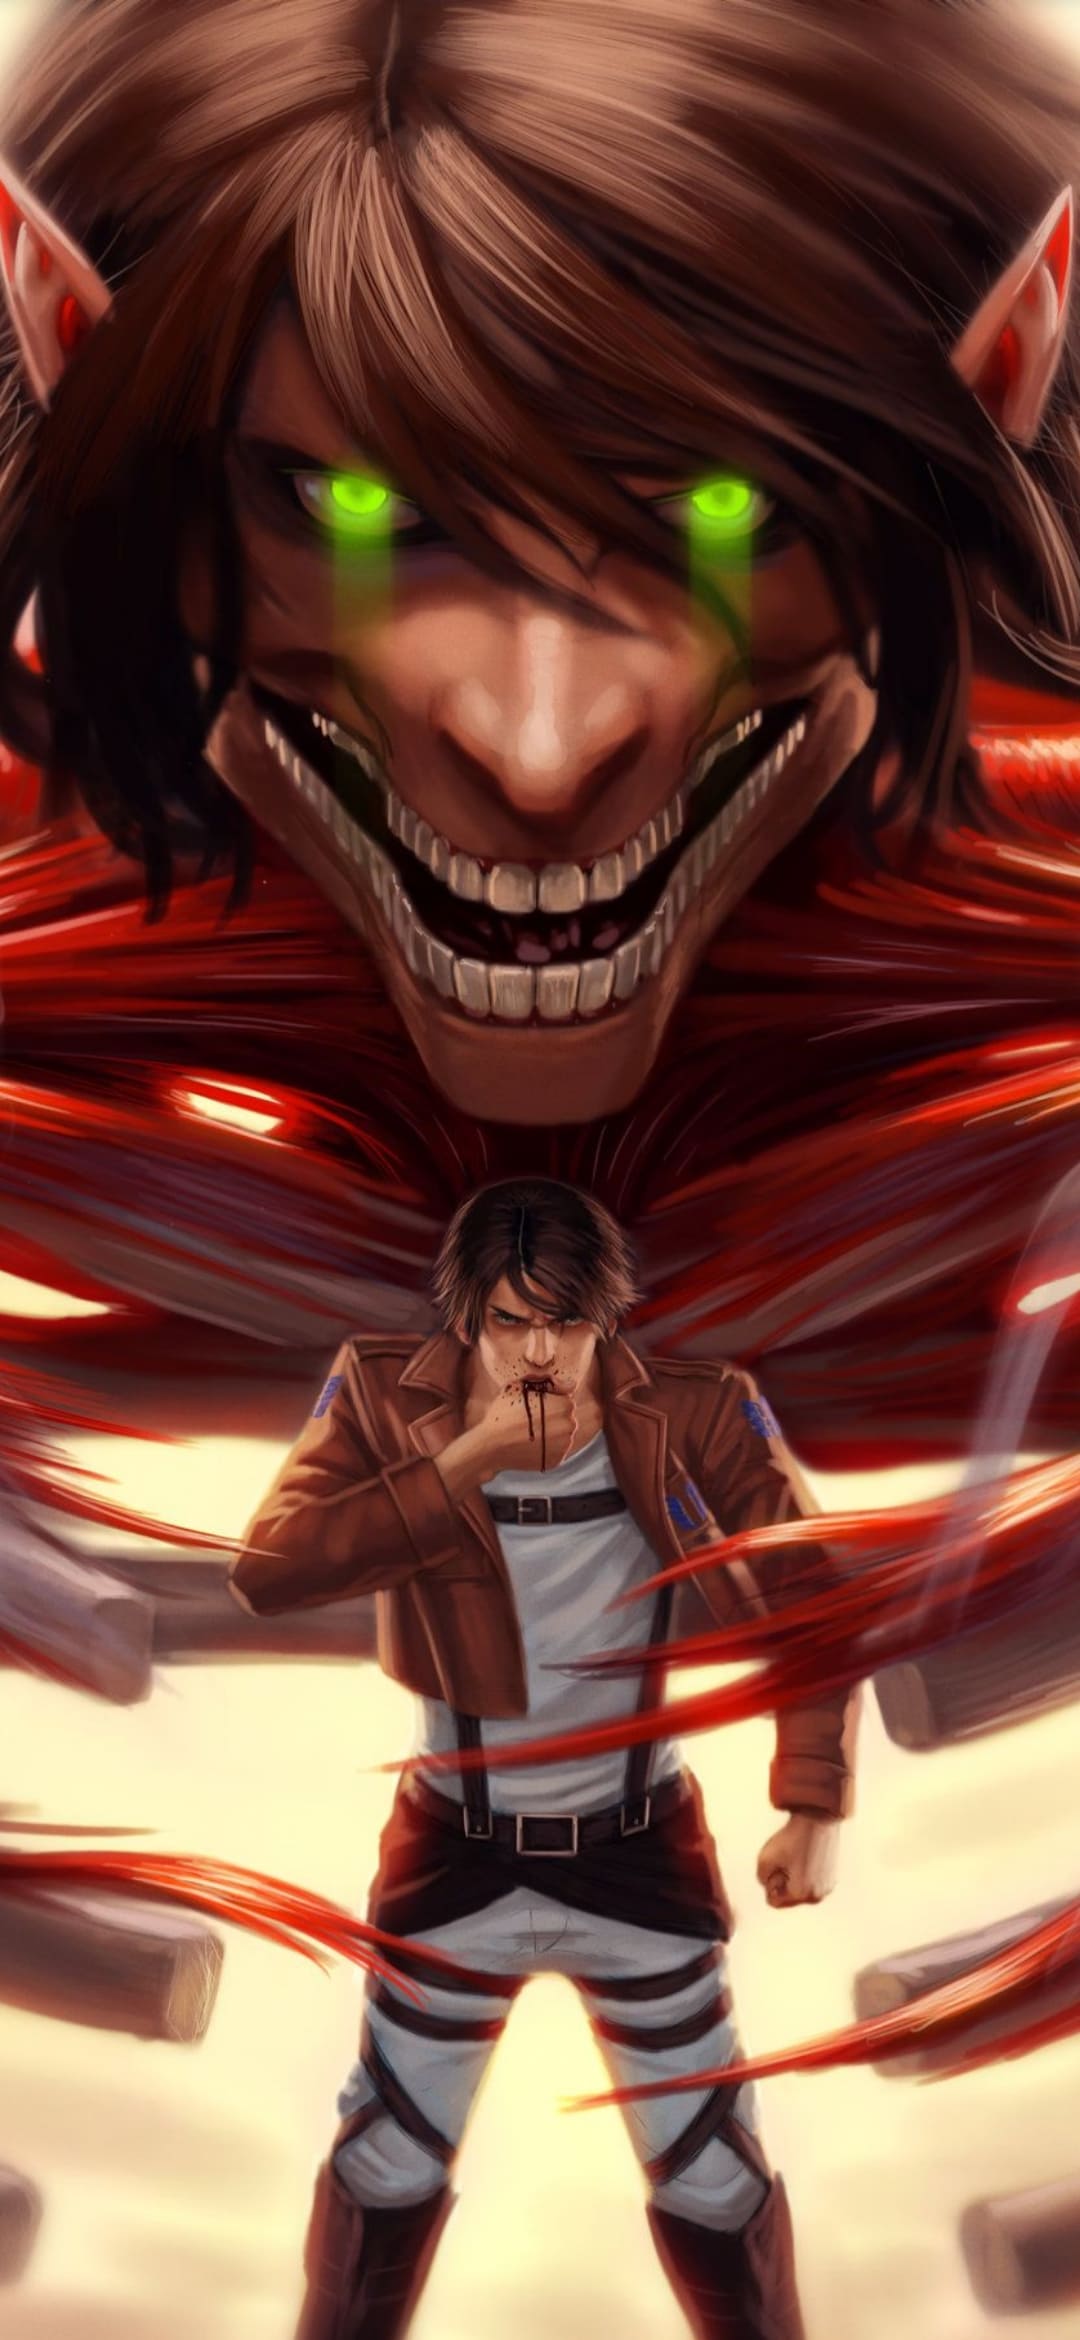 280+ 4K Anime Attack On Titan Wallpapers | Background Images